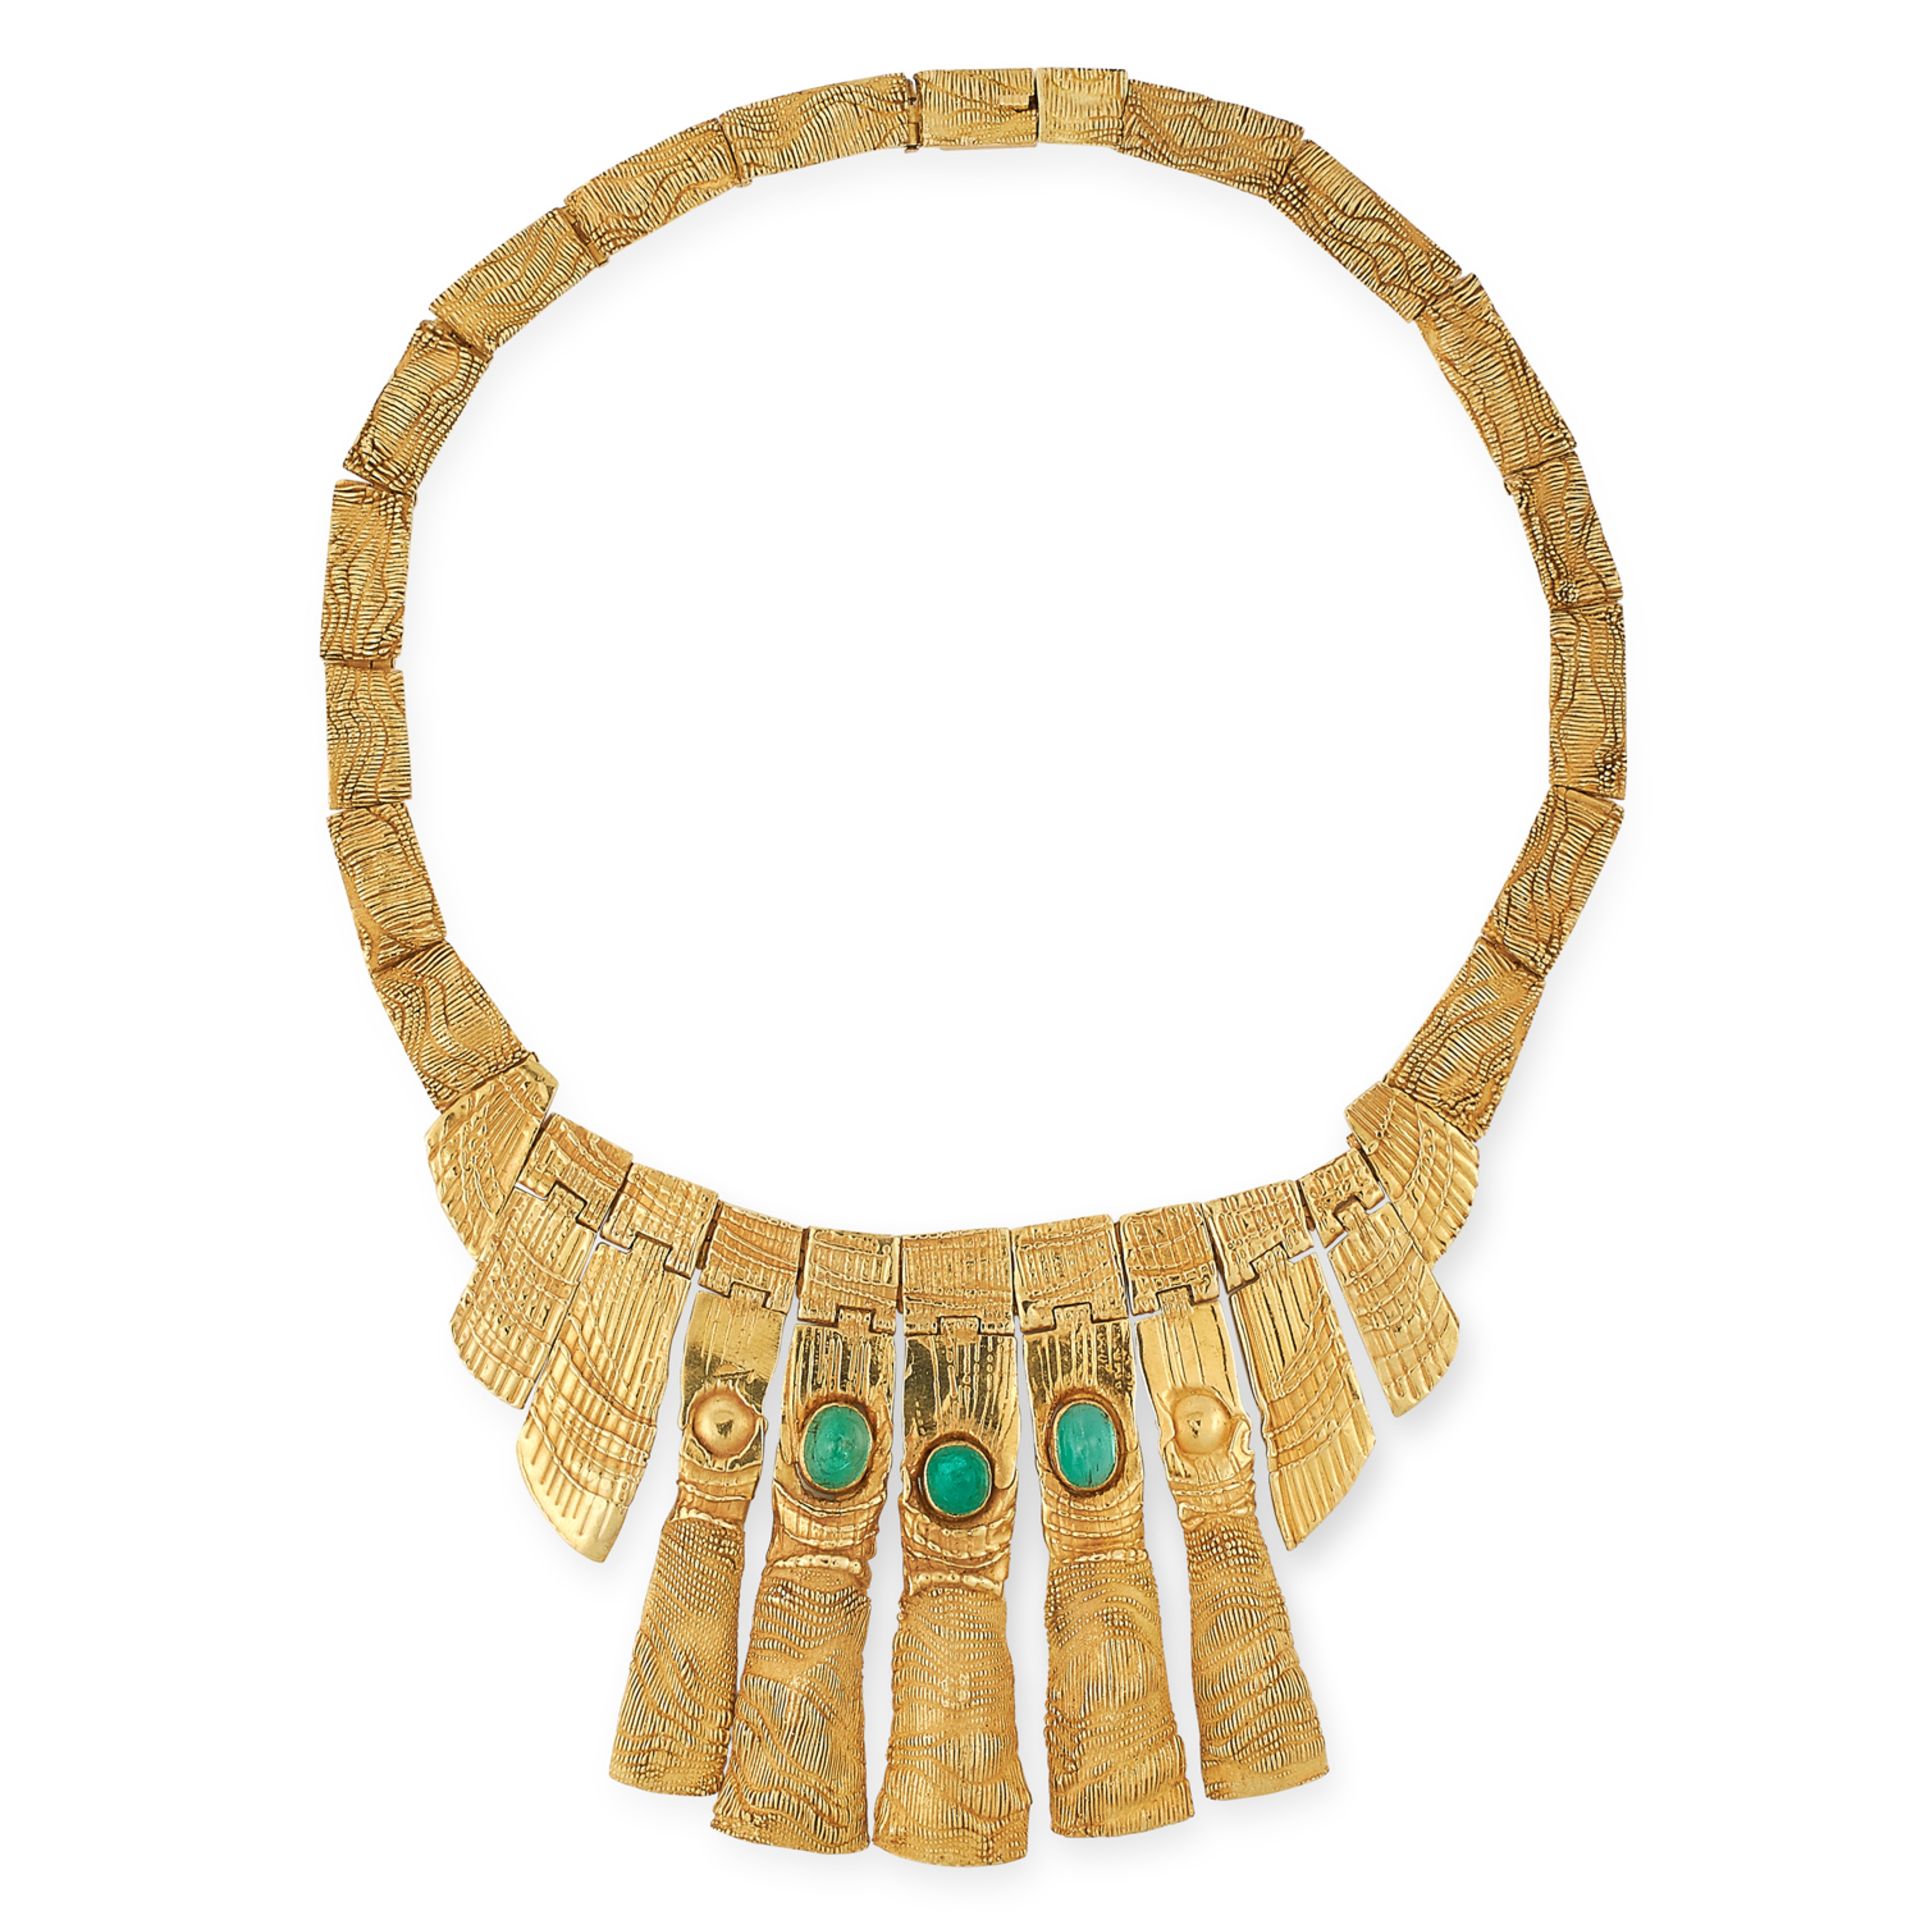 AN EMERALD NECKLACE, CHARLES DE TEMPLE 1973 formed of a fringe of graduated textured gold links, the